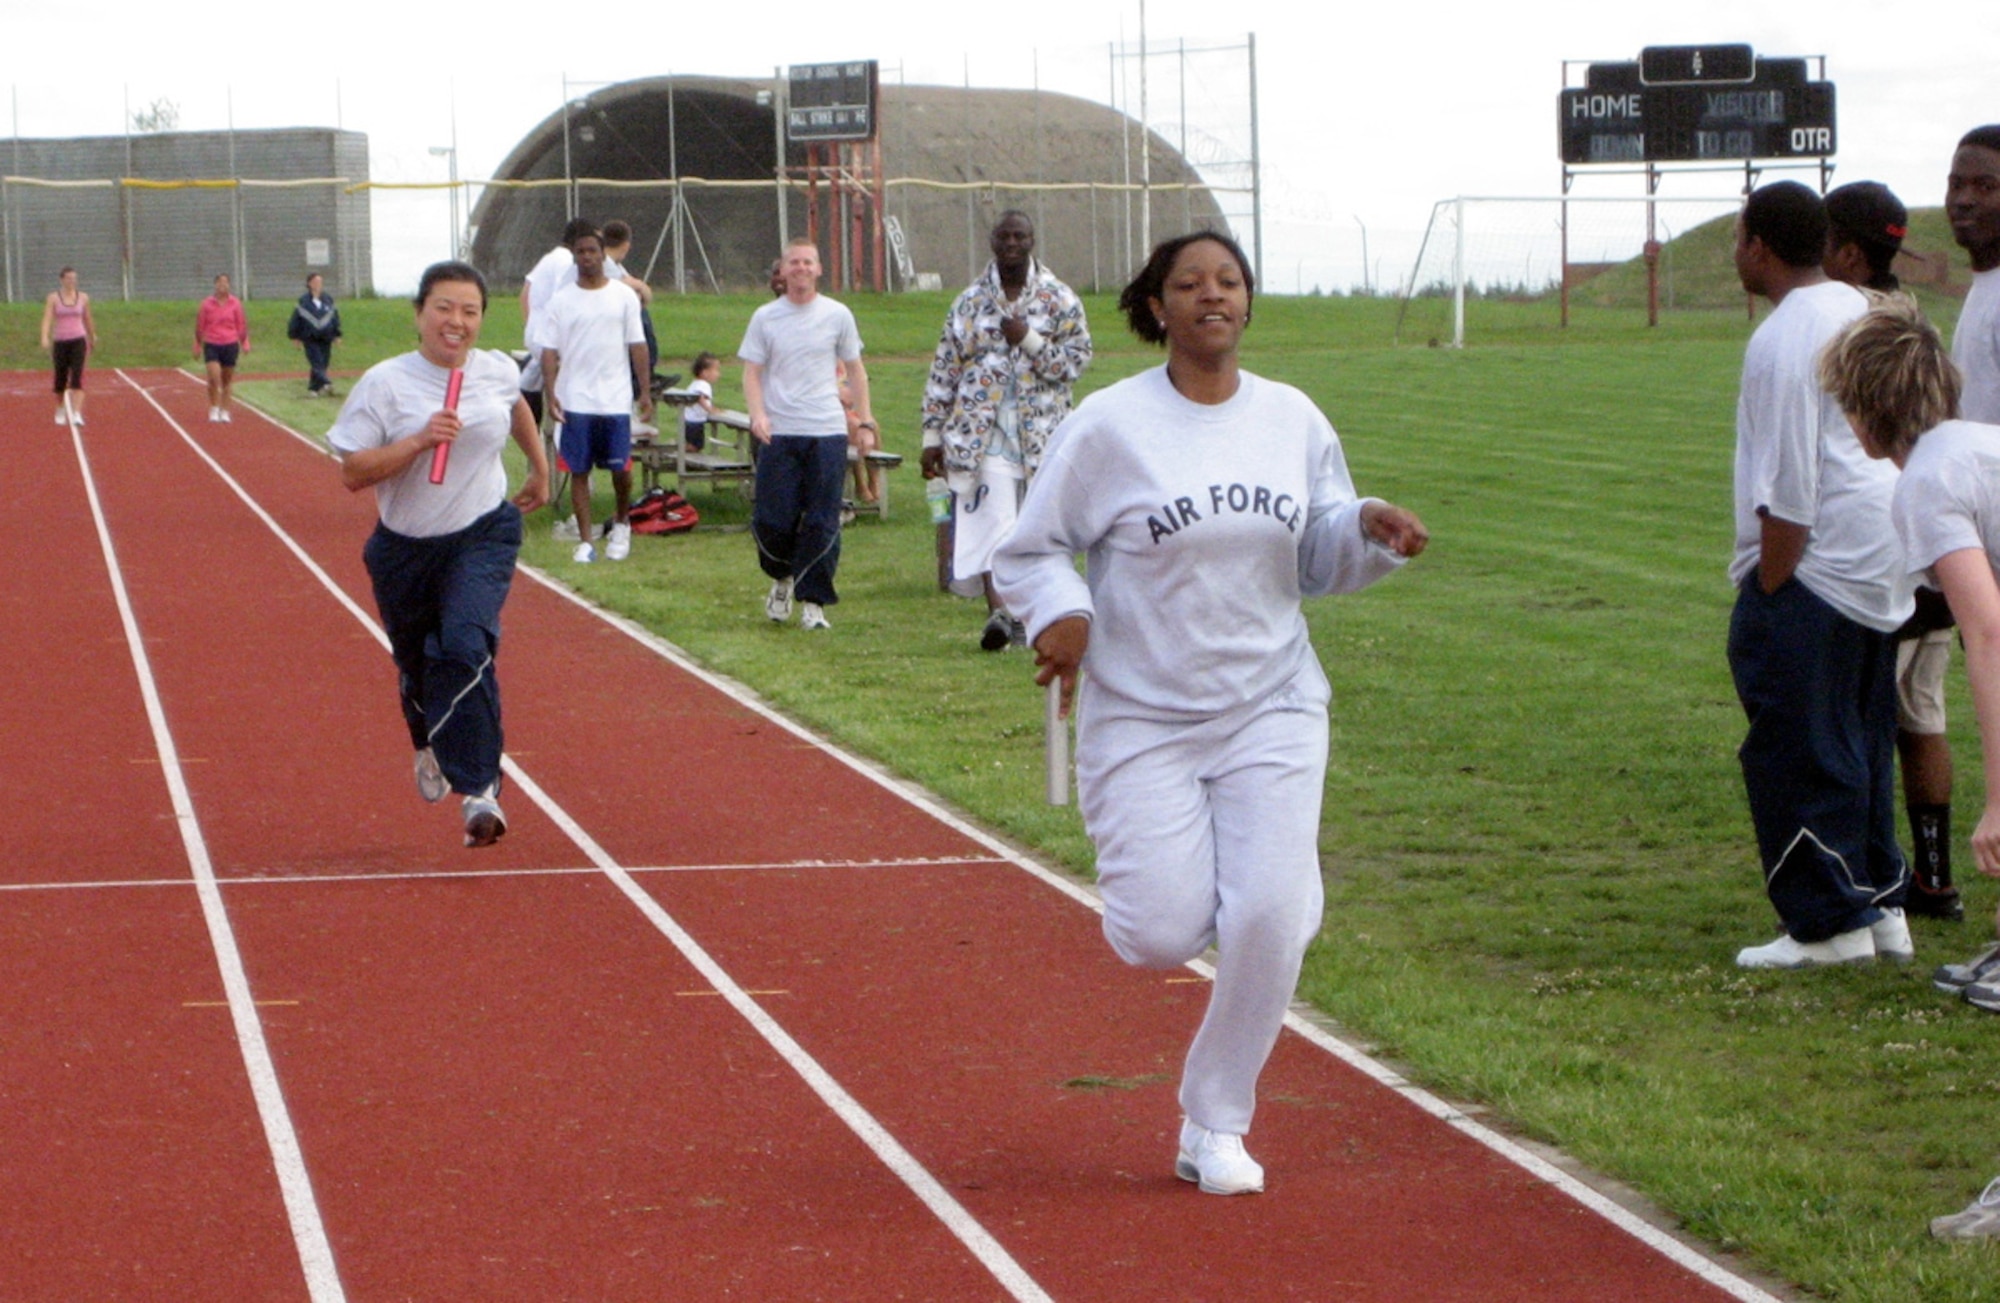 SPANGDAHLEM AIR BASE GERMANY -- During the 52nd Fighter Wing’s Sports Day July 2, 2007, 2nd Lt. Marsha Vaughans, 52nd FW protocol office, right, crosses the finish line seconds ahead of 2nd Lt. Susan Wong-Tworek, 52nd Communications Squadron, to seal first place for the 52nd Mission Support Squadron team for the 400-meter relay race. The 52nd CS’s team came in first place overall for sports day. (U.S. Air Force photo/Staff Sgt. Andrea Knudson)